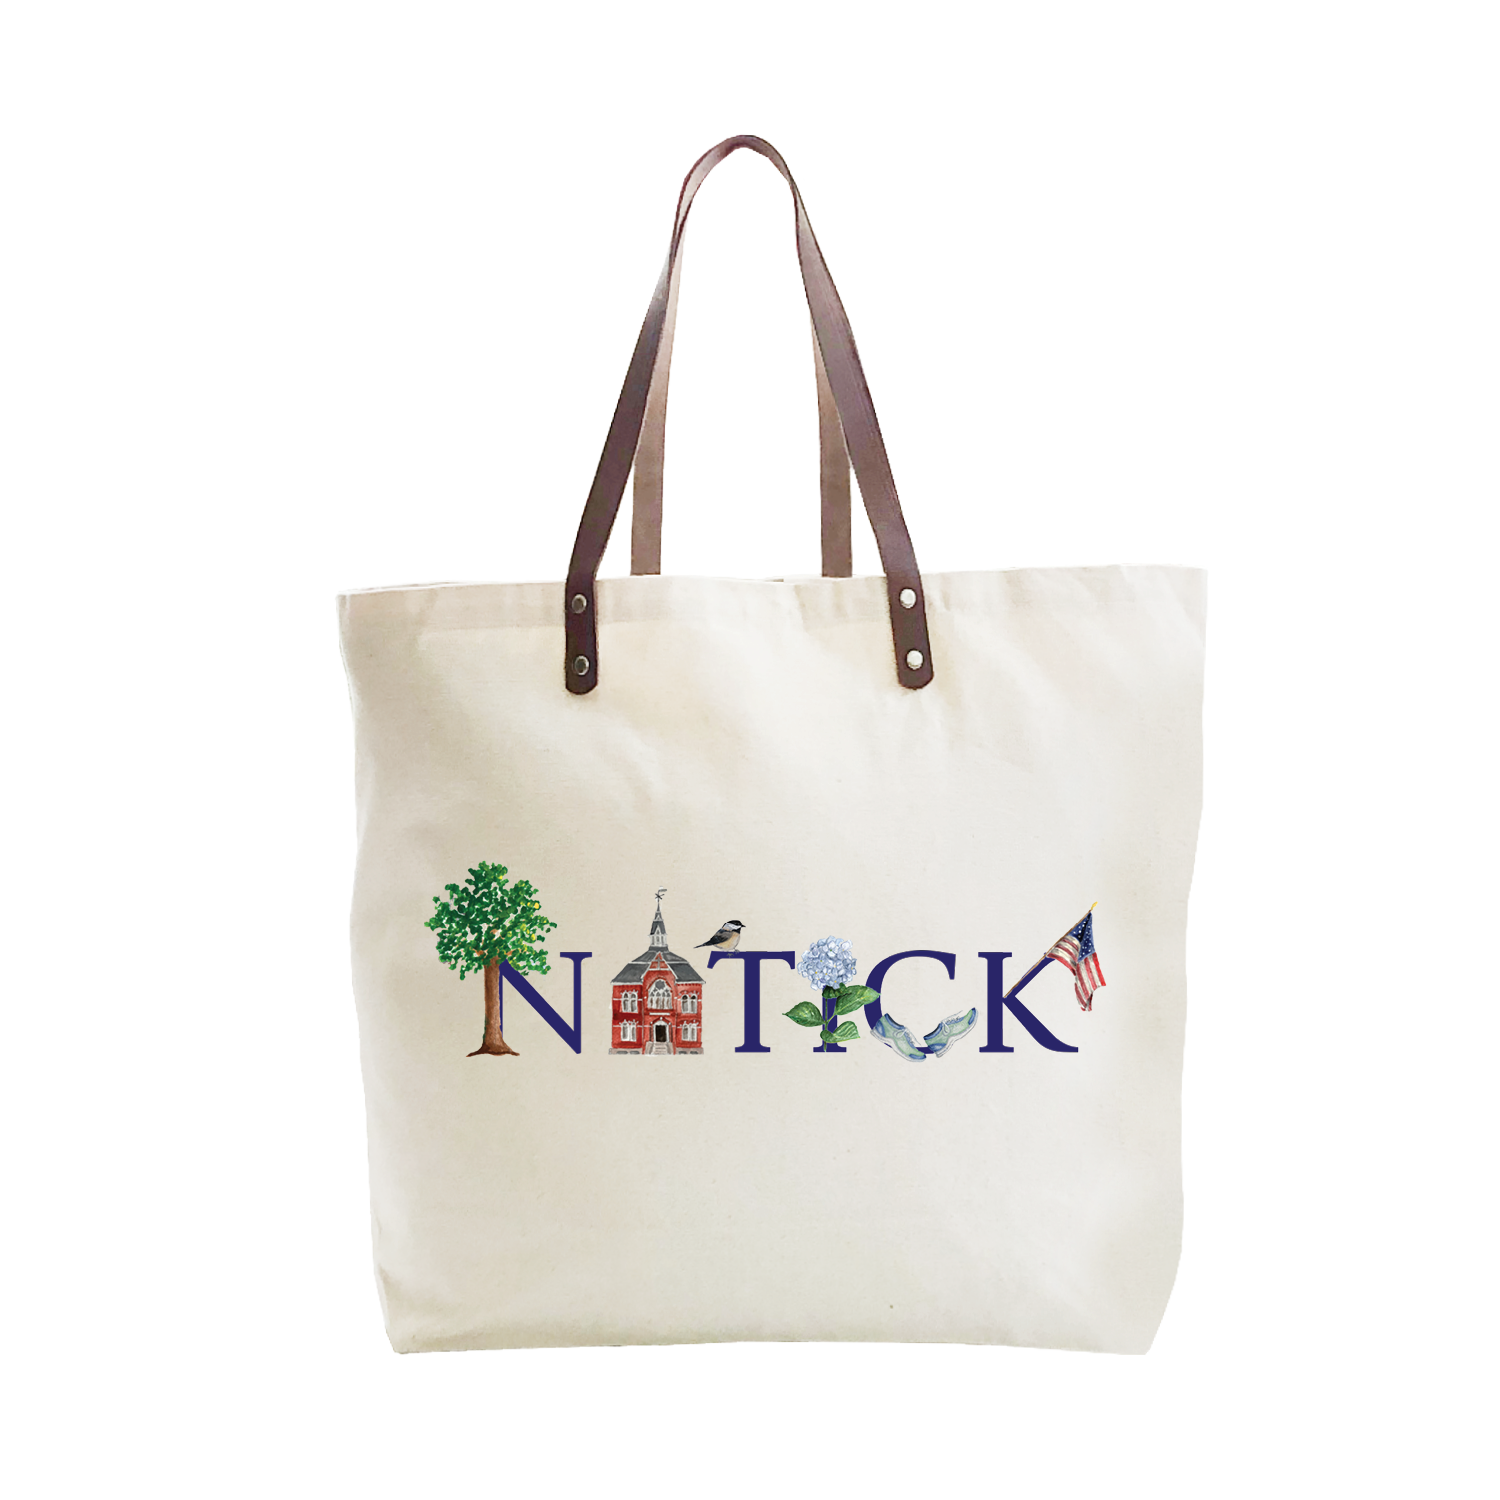 natick large tote